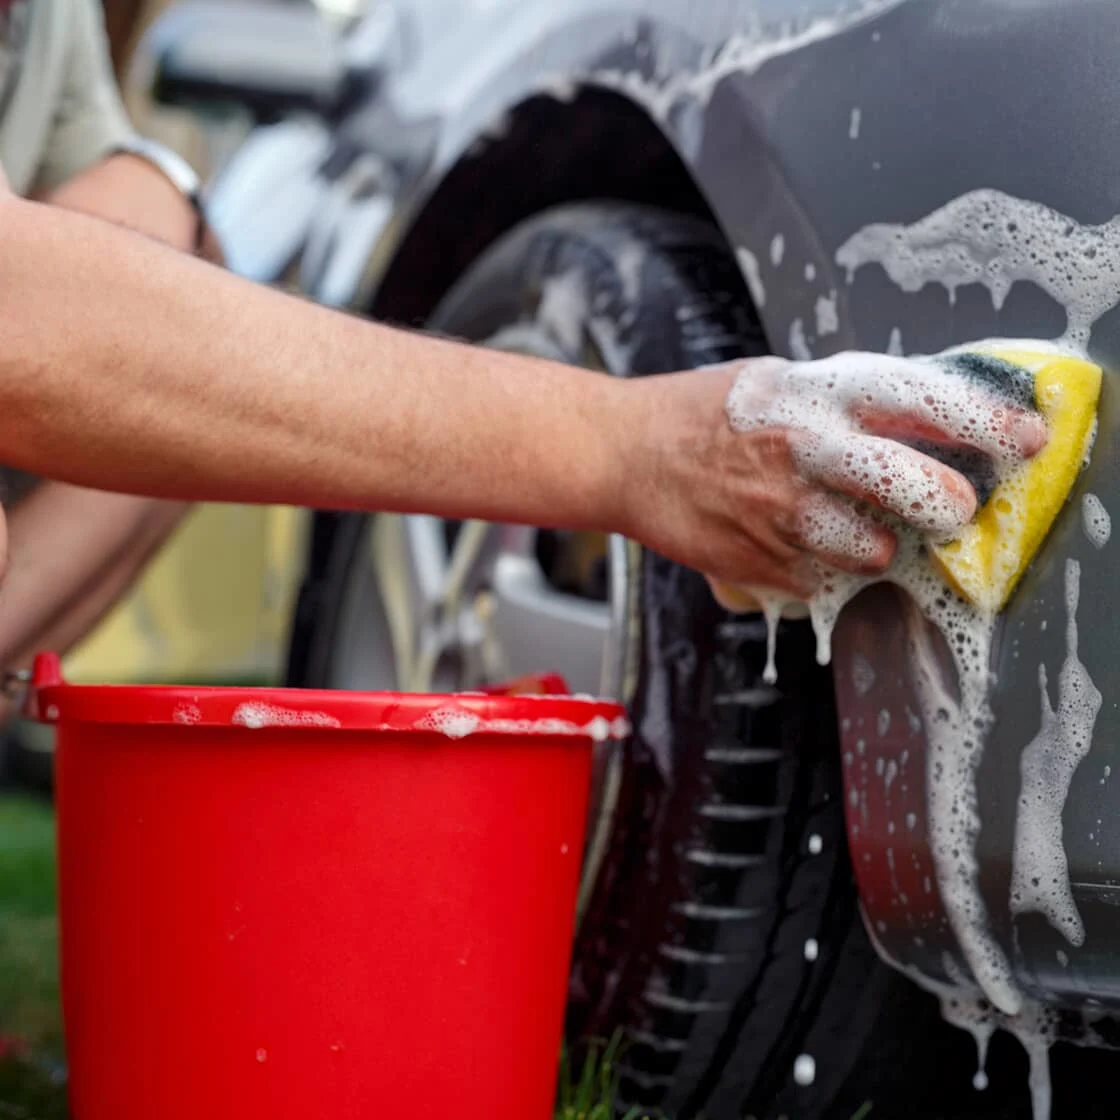 Is Your Ride in Need of a Refresh? Here's How to Clean Your Car